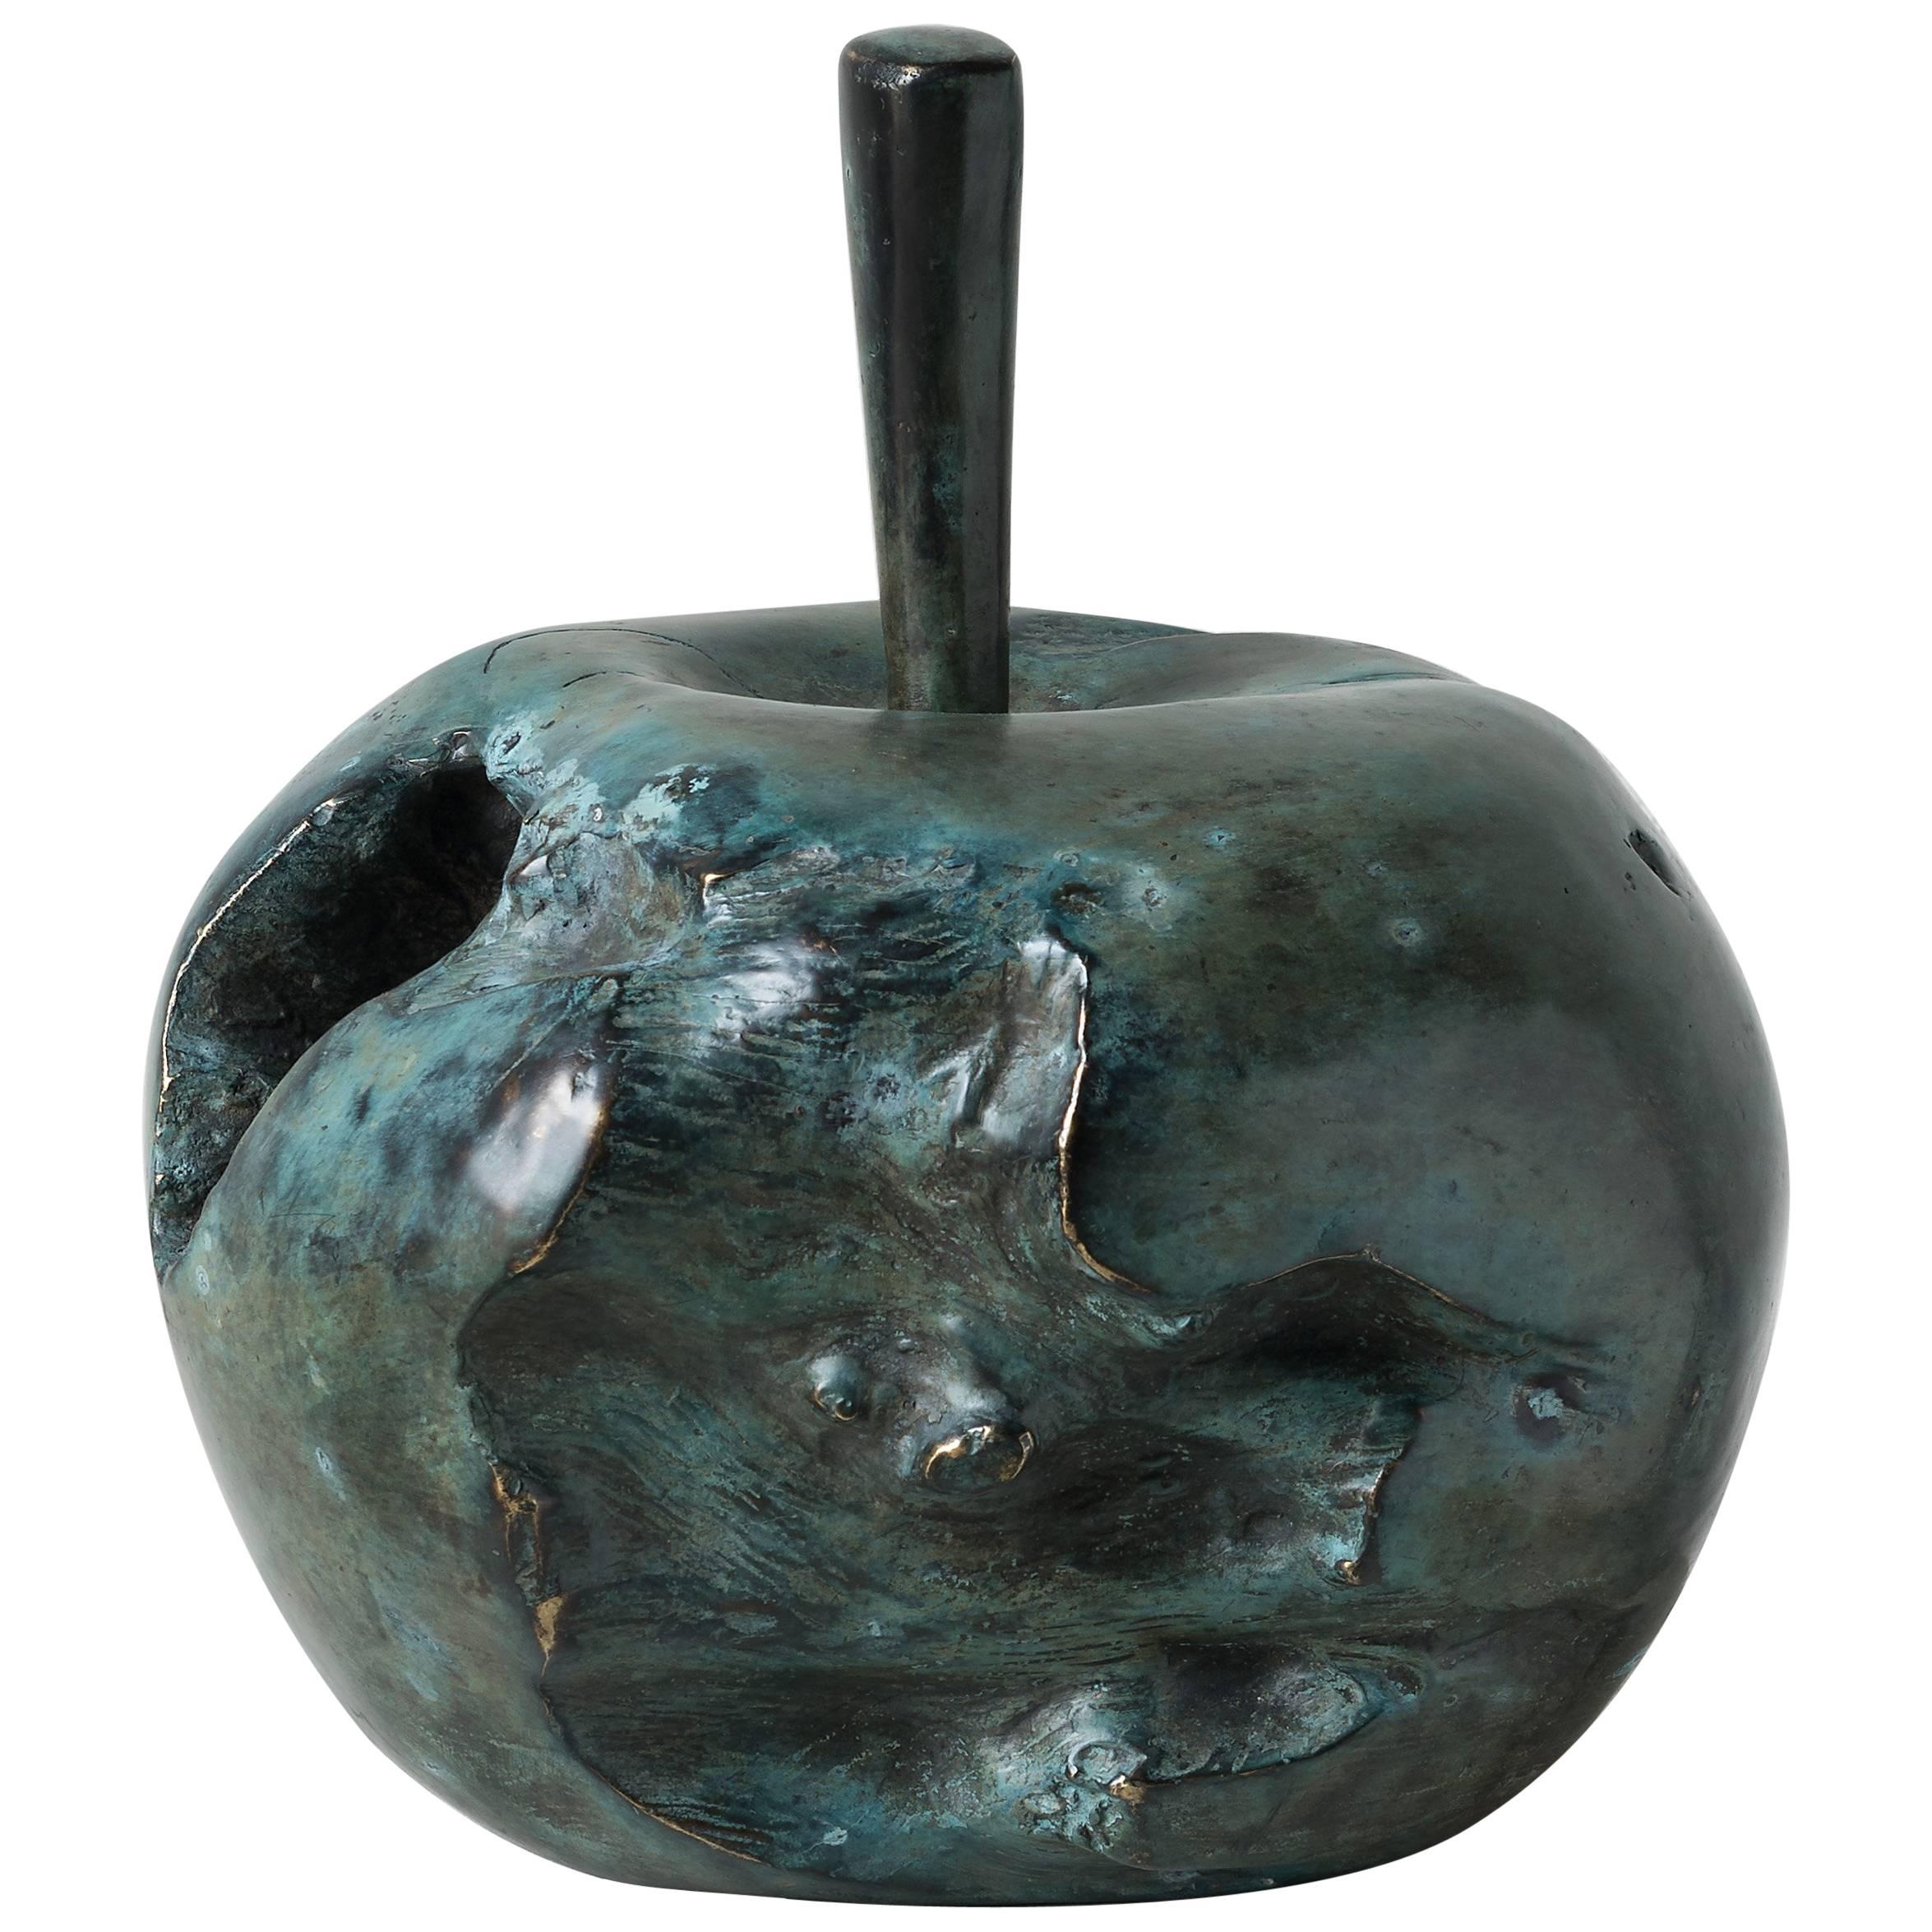 Andreas Wargenbrant "My First Apple", Sculpture in Bronze, No. 13/99 For Sale